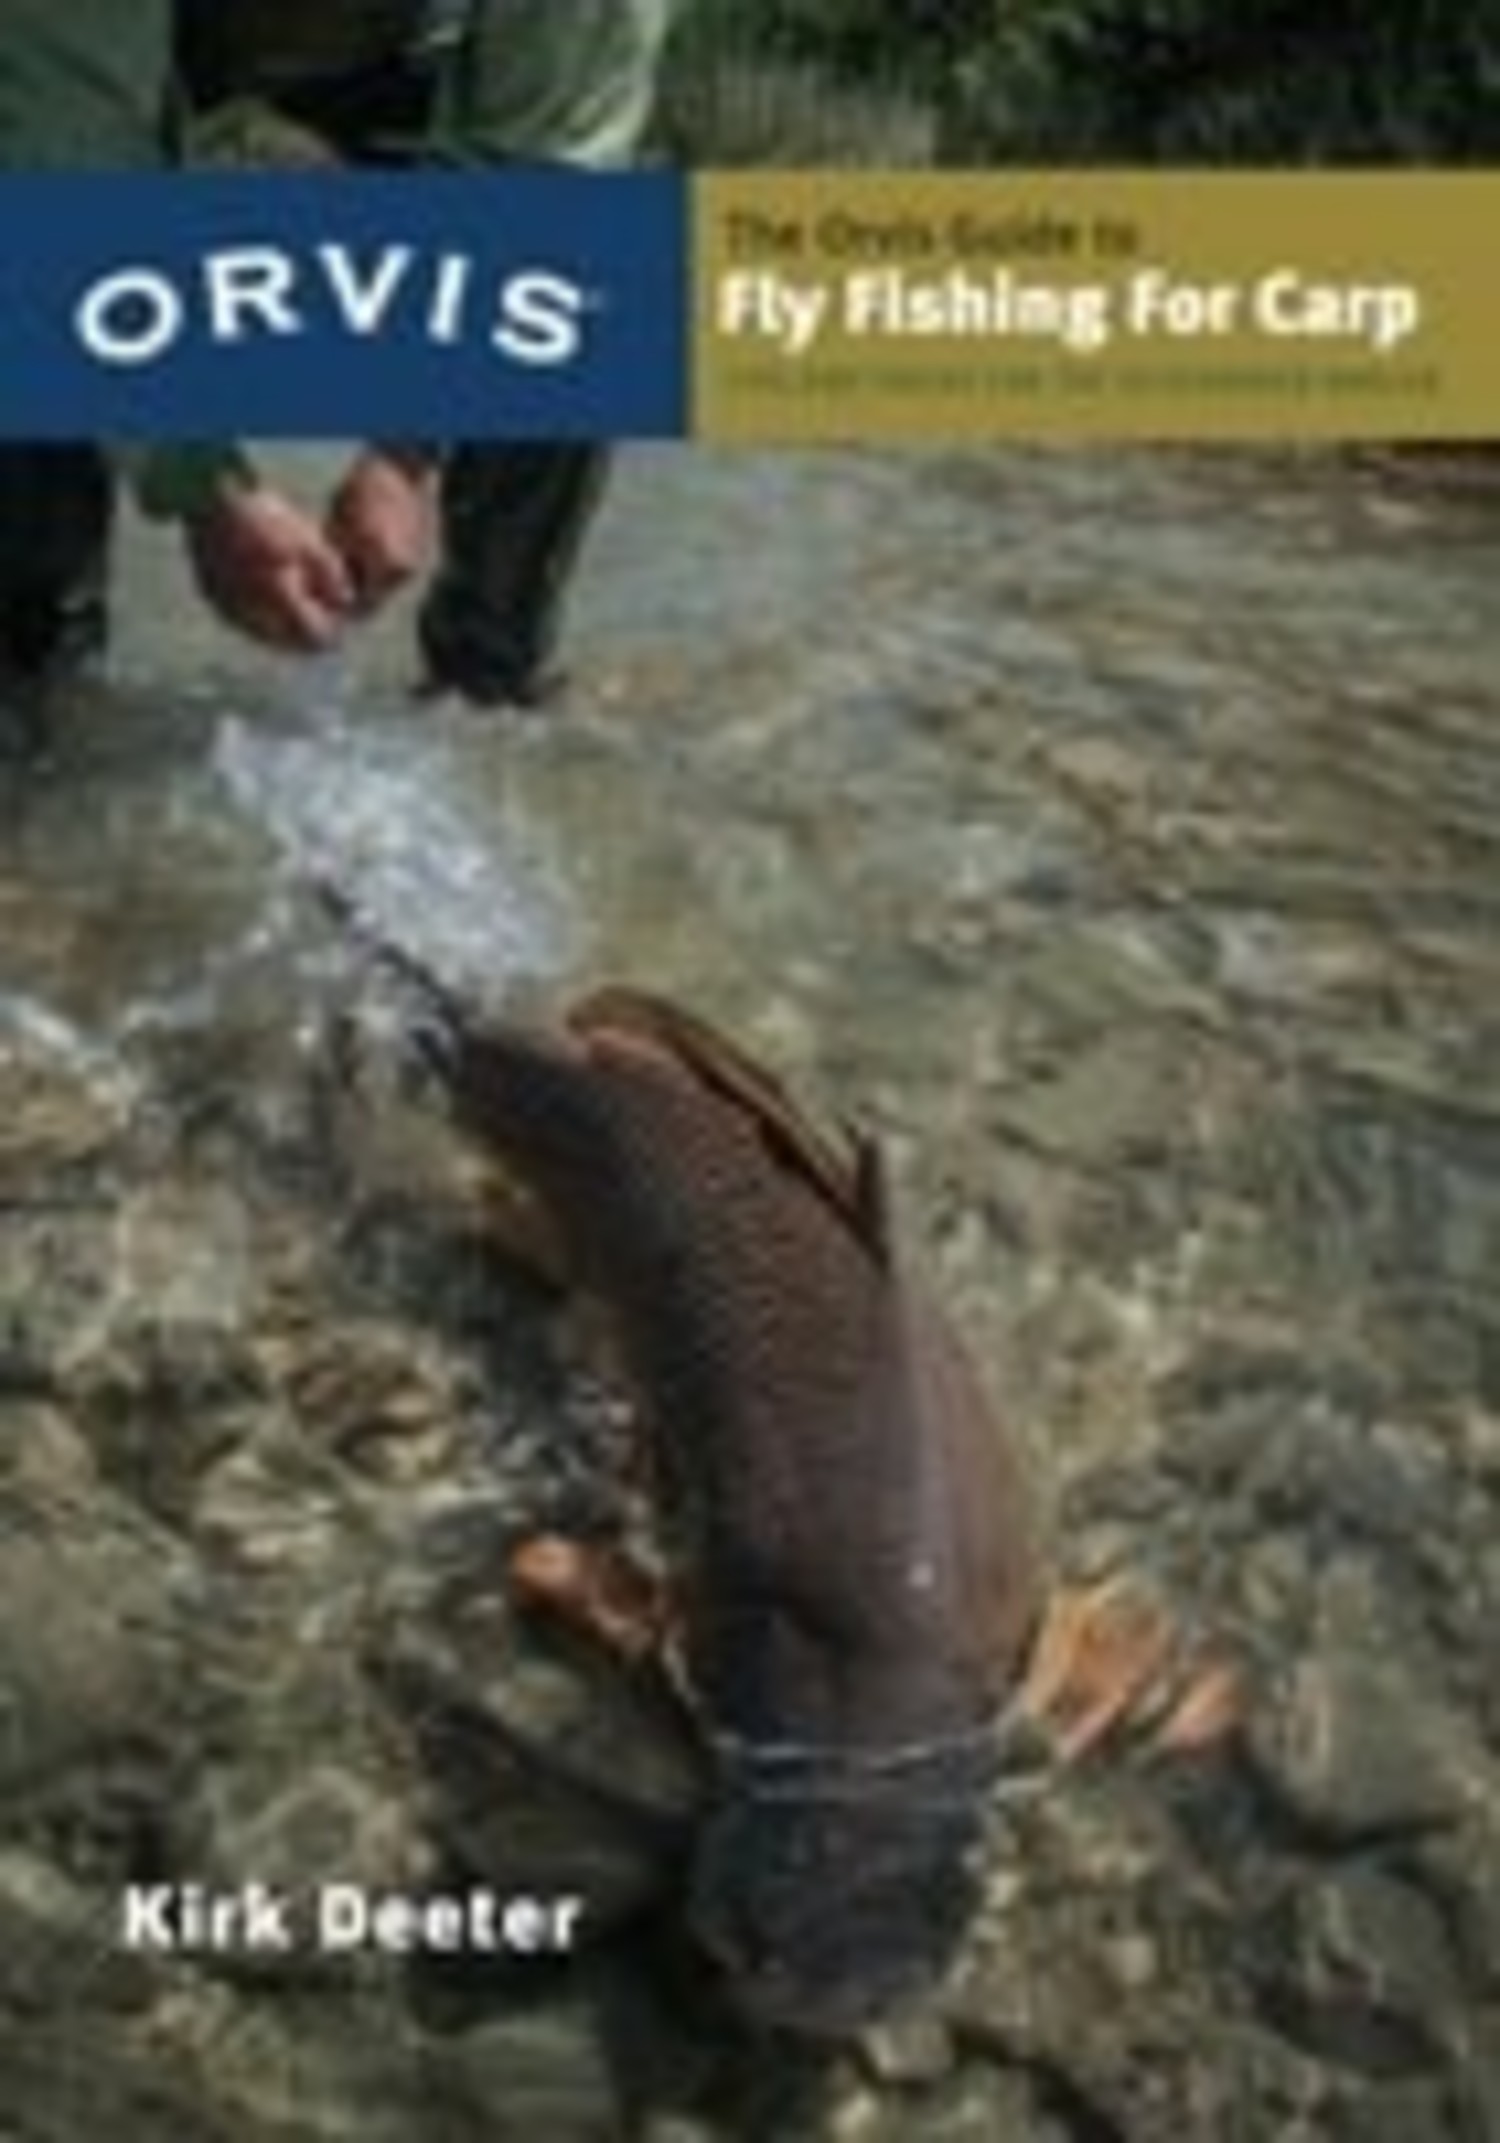 The Orvis Guide to Fly Fishing for Carp: Tips and Tricks for the Determined Angler [Book]